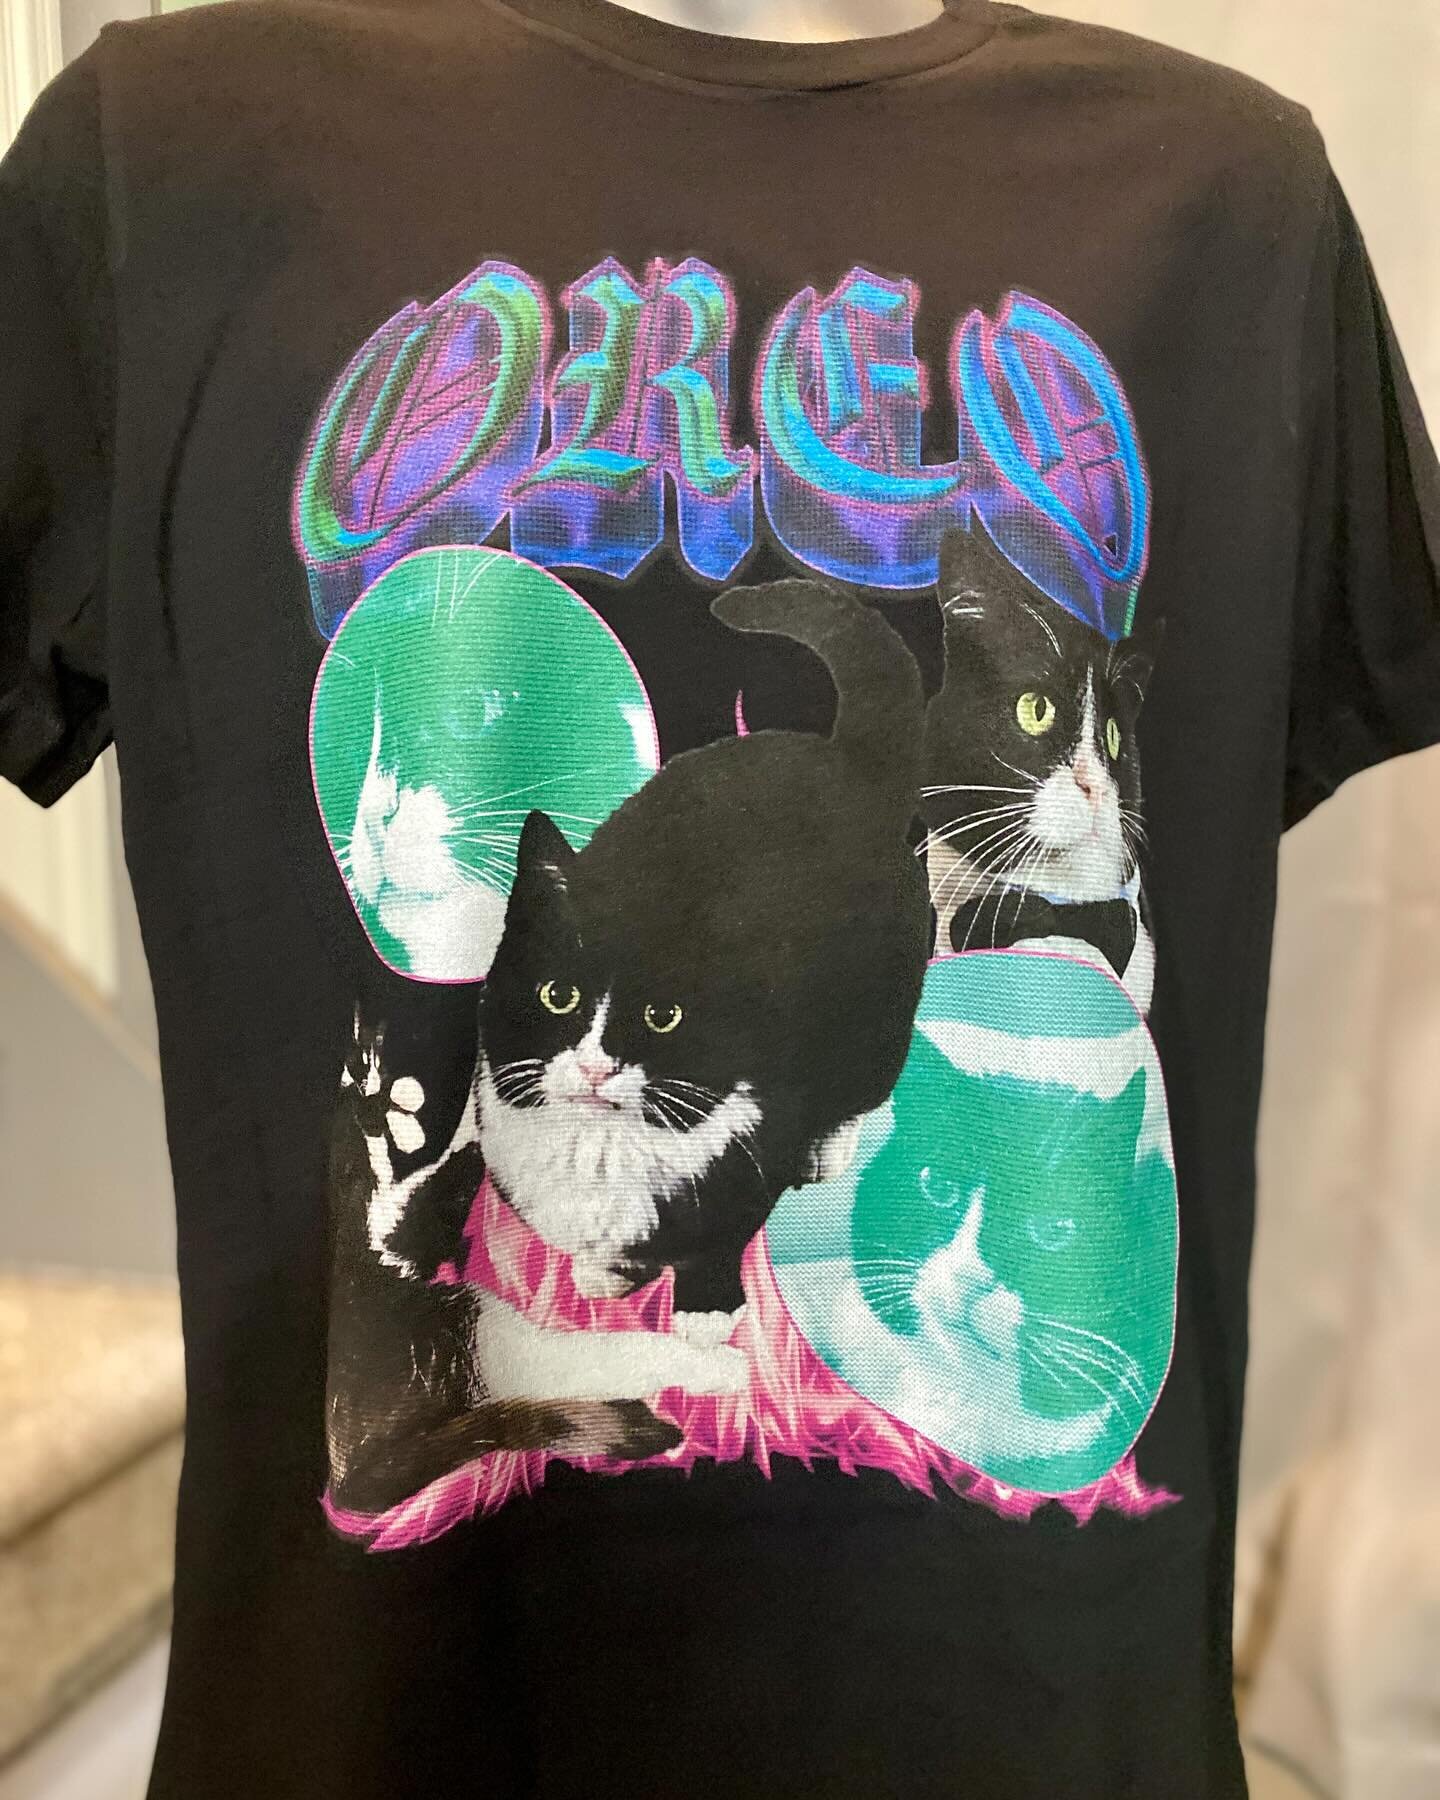 now live in the DEP collection: custom 90&rsquo;s bootleg-style tees! i wasn&rsquo;t cool enough to own any in the actual 90&rsquo;s so excuse me while i make myself 900&ndash;starting of course with this one of my handsome catson @tux_oreo 😻 check 